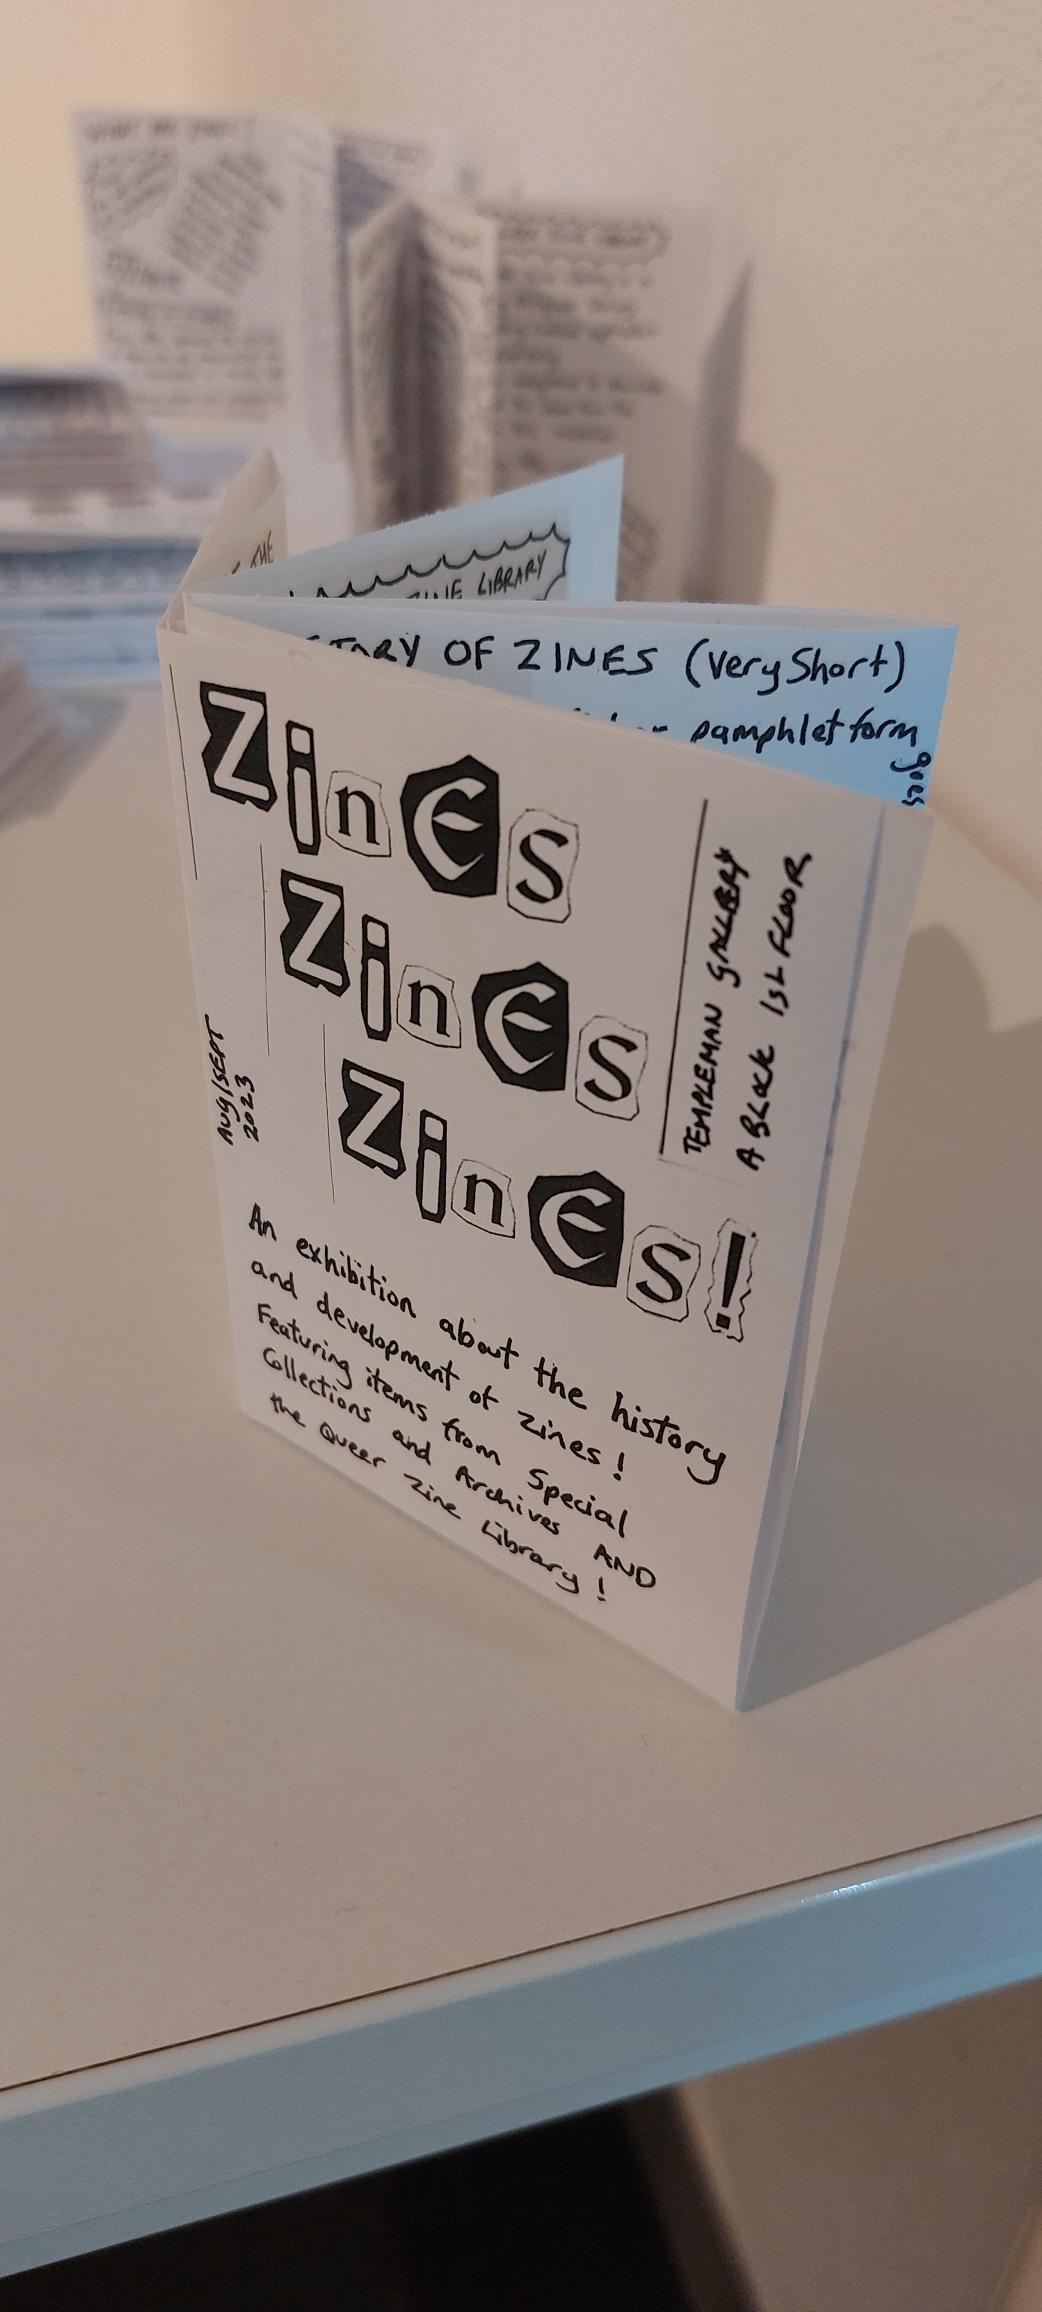 Small black and white zine, standing up with the front cover visible showing the text "Zines Zines Zines! Templeman gallery A Block 1st Floor. Aug/Sept 2023. An exhibition about the history and development of zines! Featuring items from Special Collections and Archives AND the Queer Zine Library!" In the background of the image in soft focus are other copies of the zine displayed on the table. 